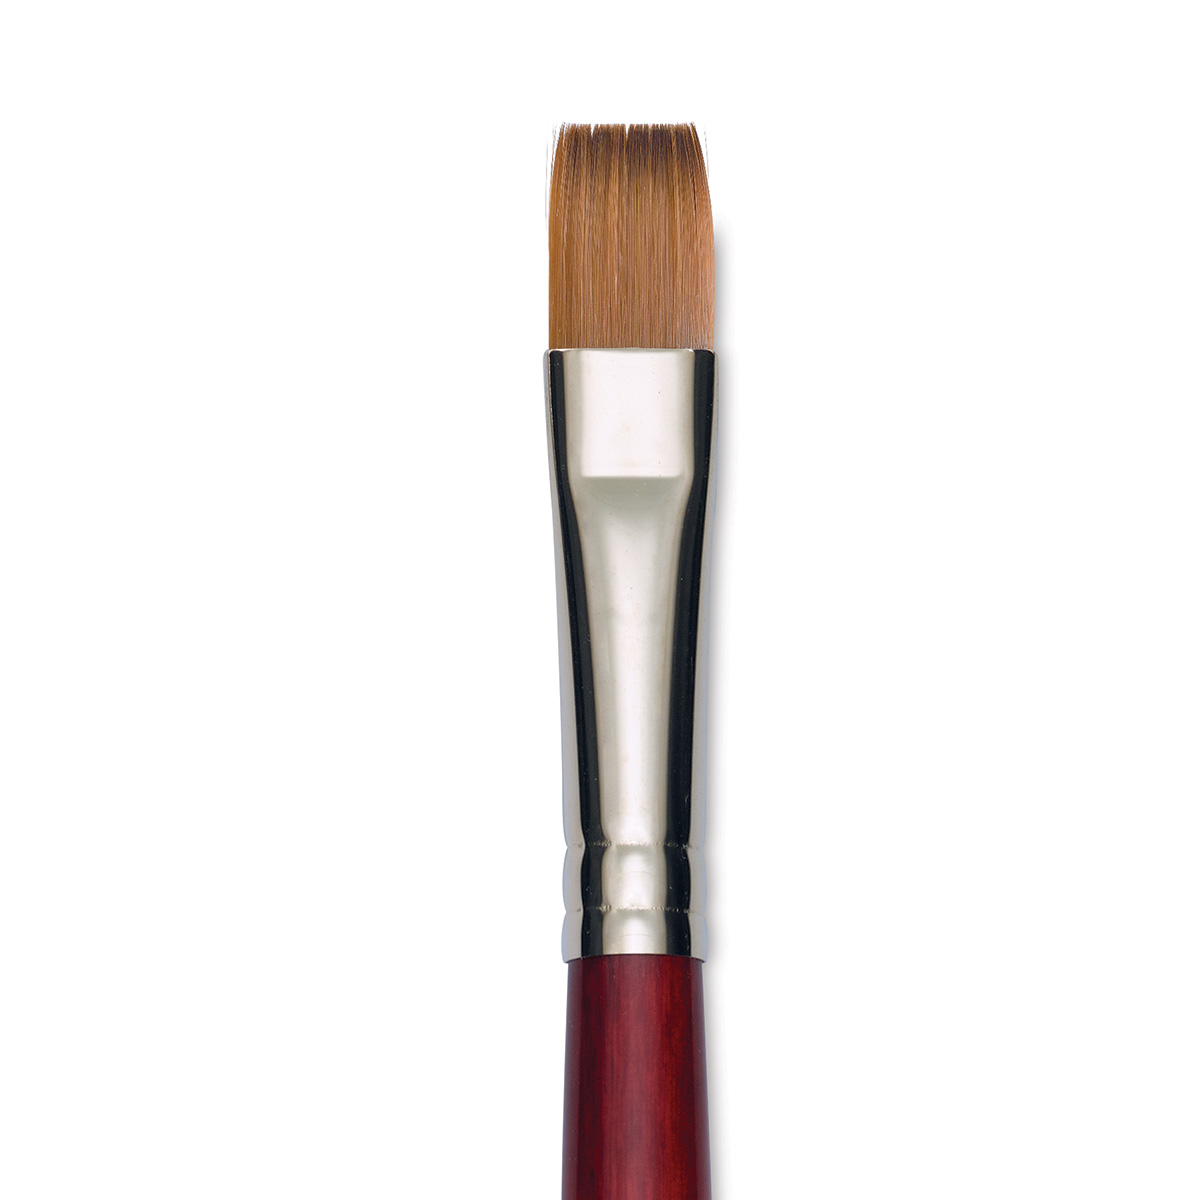 Princeton Synthetic Sable Brush - Bright, Long Handle, Size 16